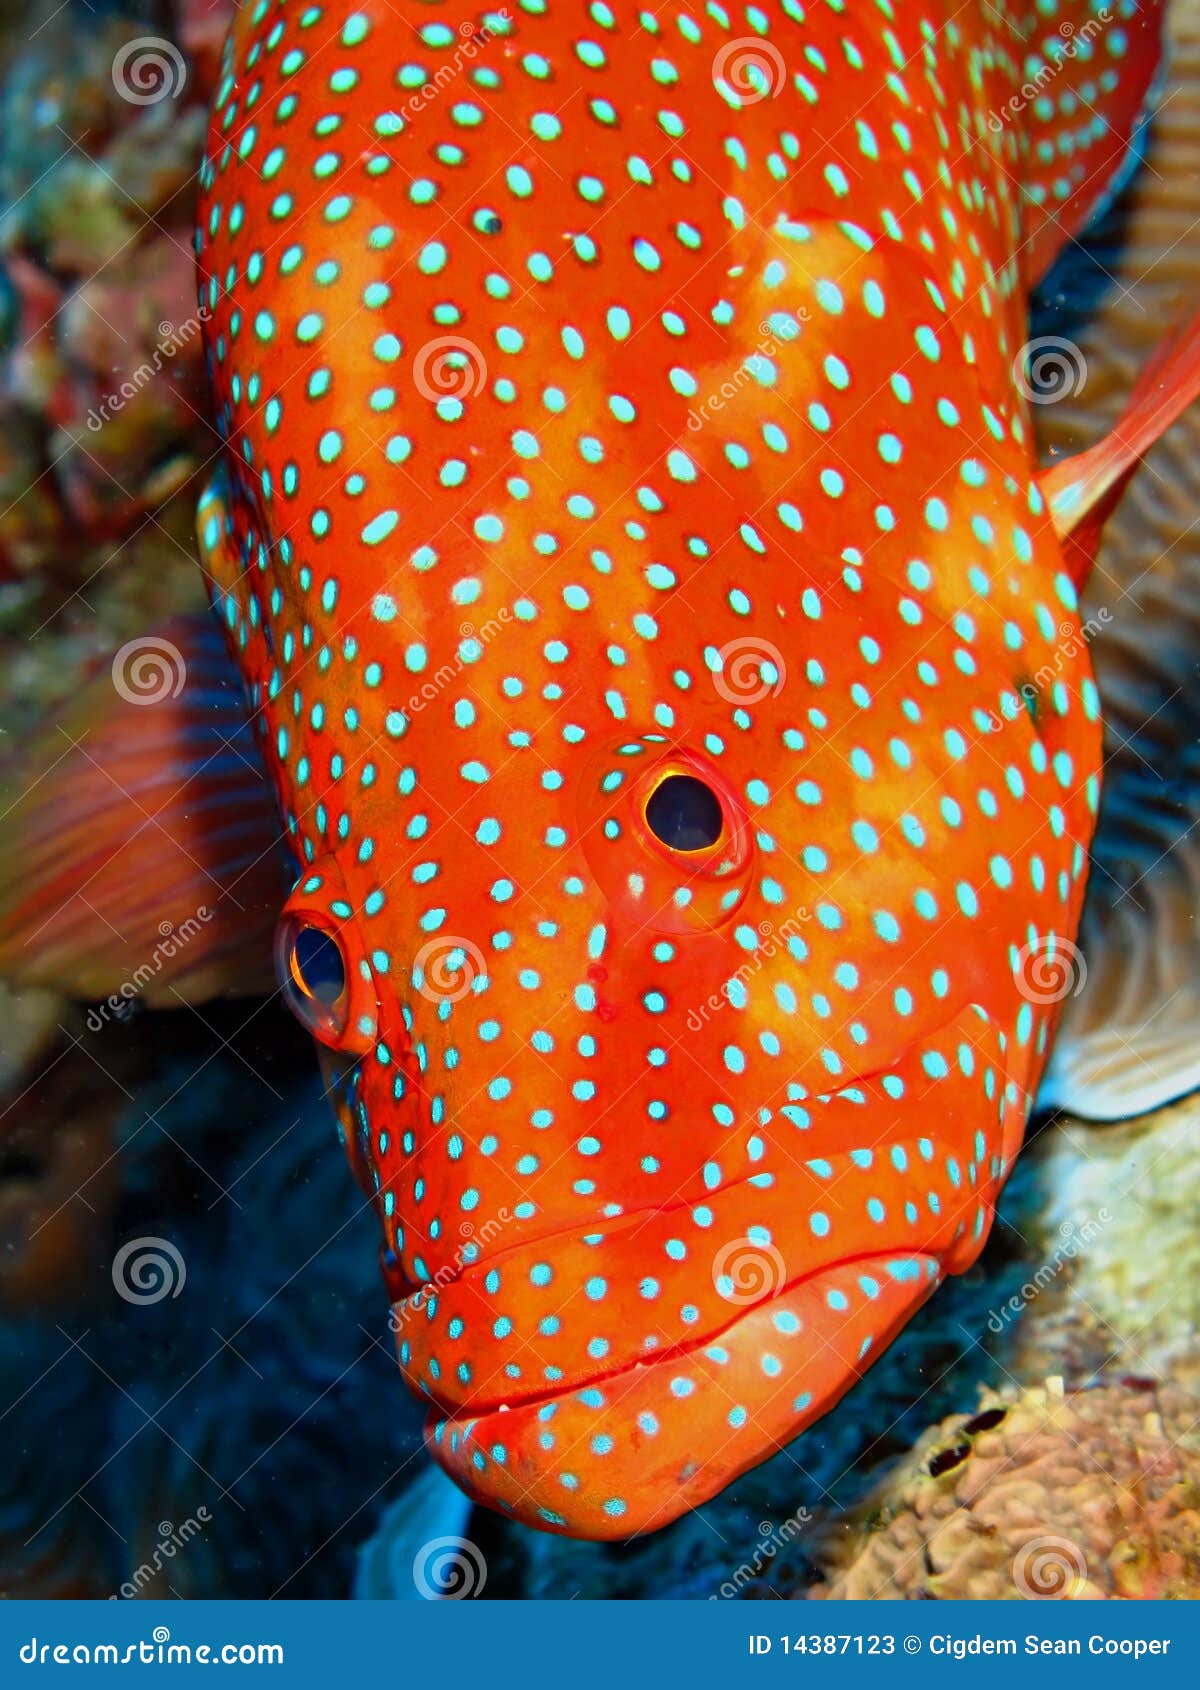 coral hind grouper